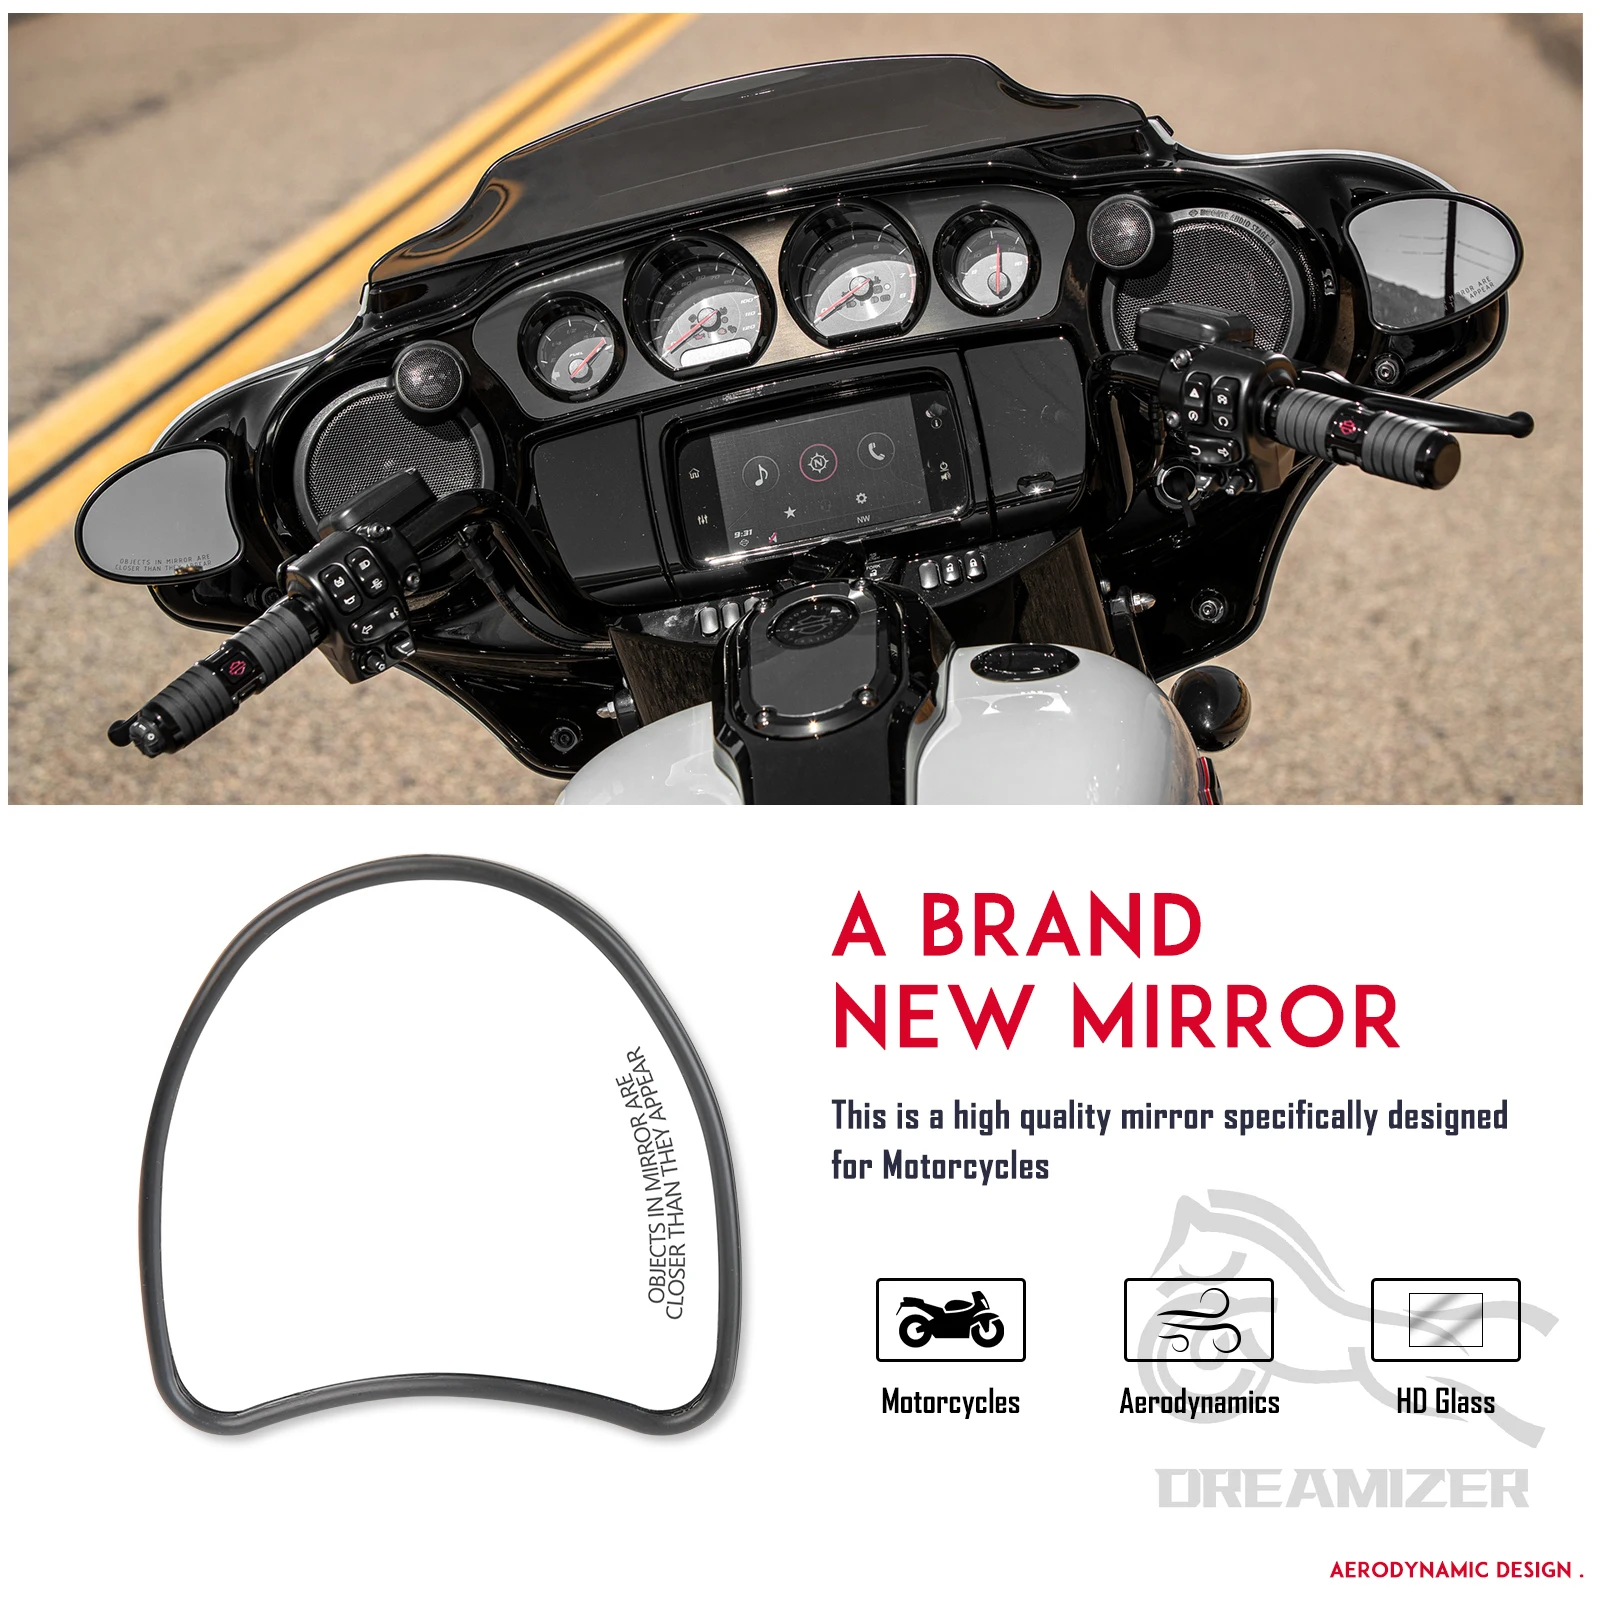 Motocycle Black Rearview Mirror For Harley Electra Street Glide Ultra Limited Tri Glide 2014 Batwing Fairing Mount Side Mirrors street reversing gliding modification rearview mirror bracket 00 13